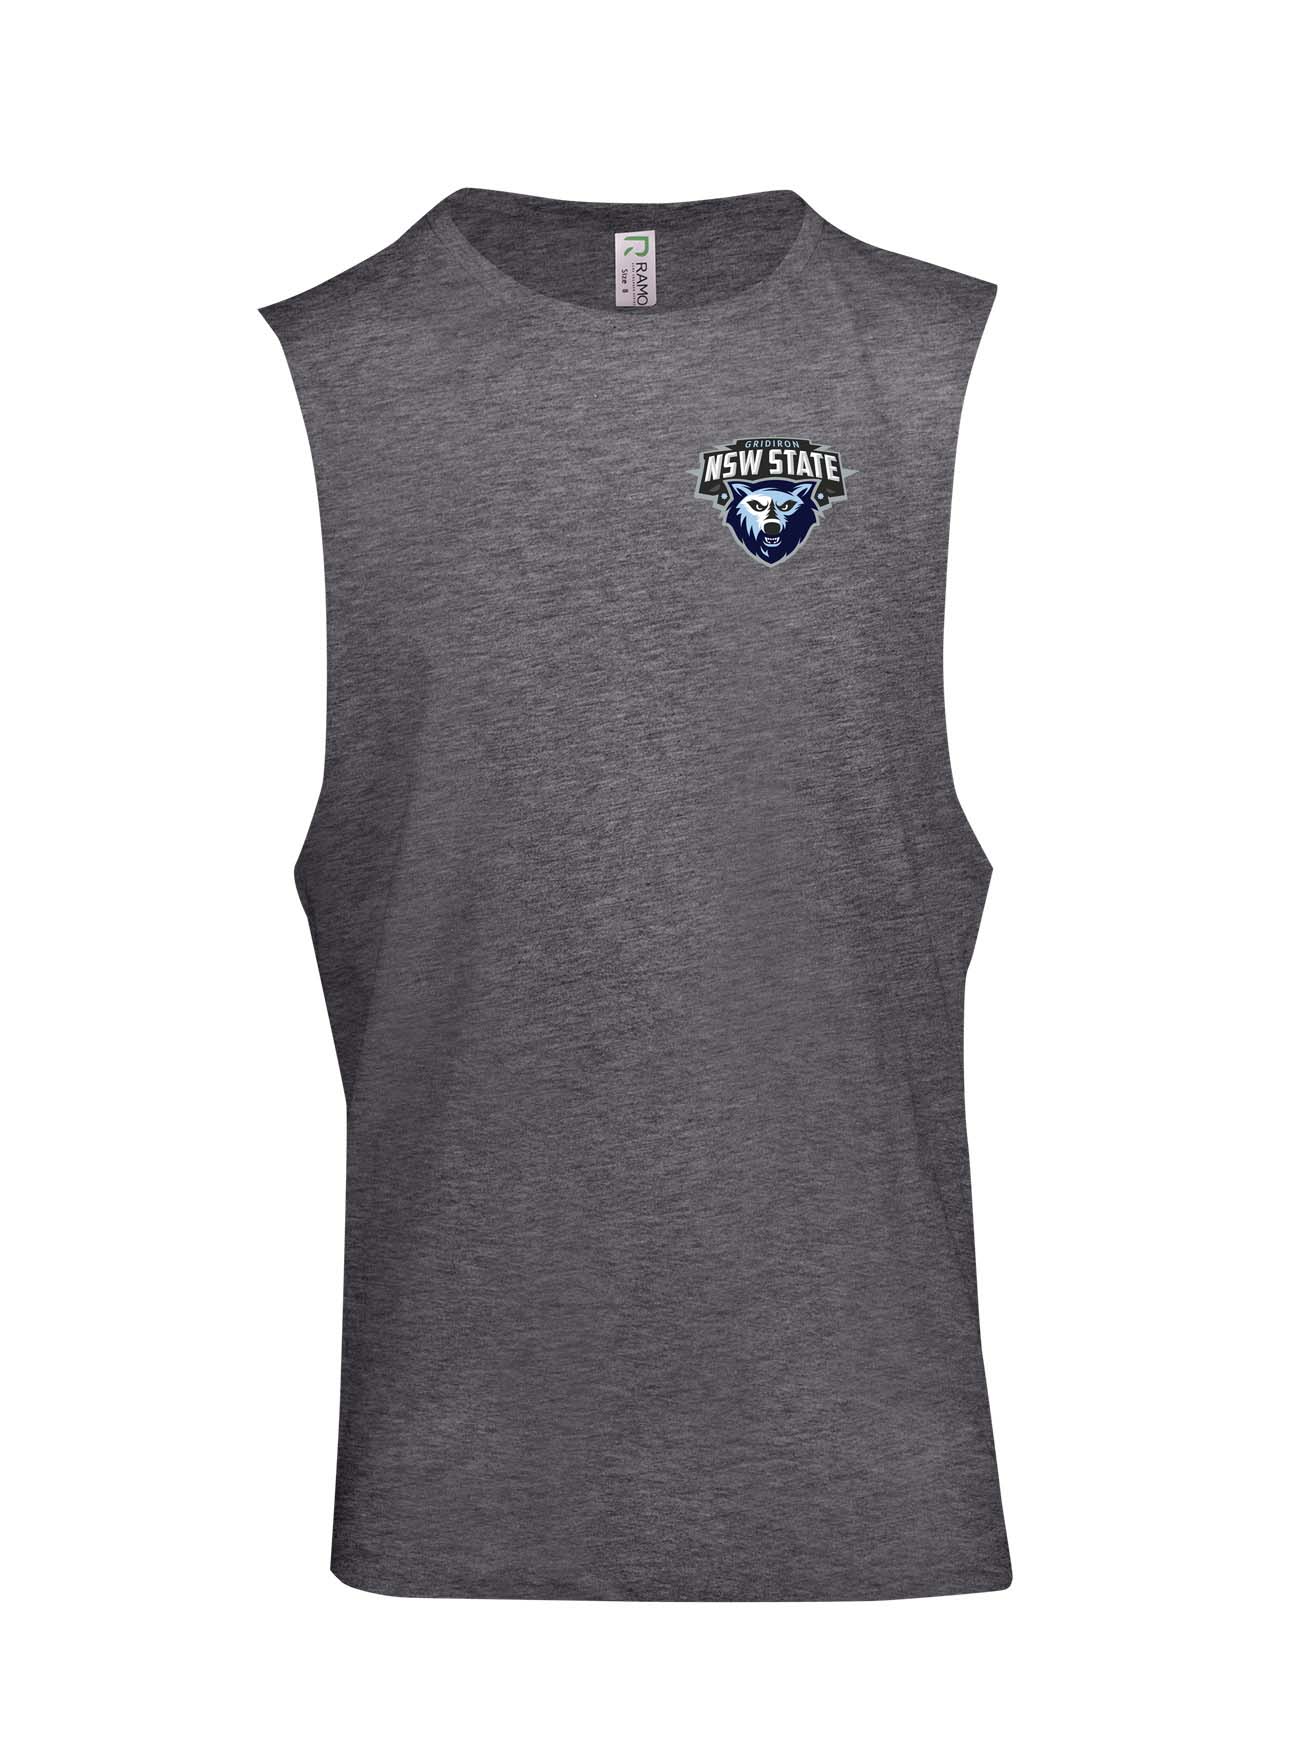 NSW MUSCLE TEE DOUBLE SIDED - LADIES